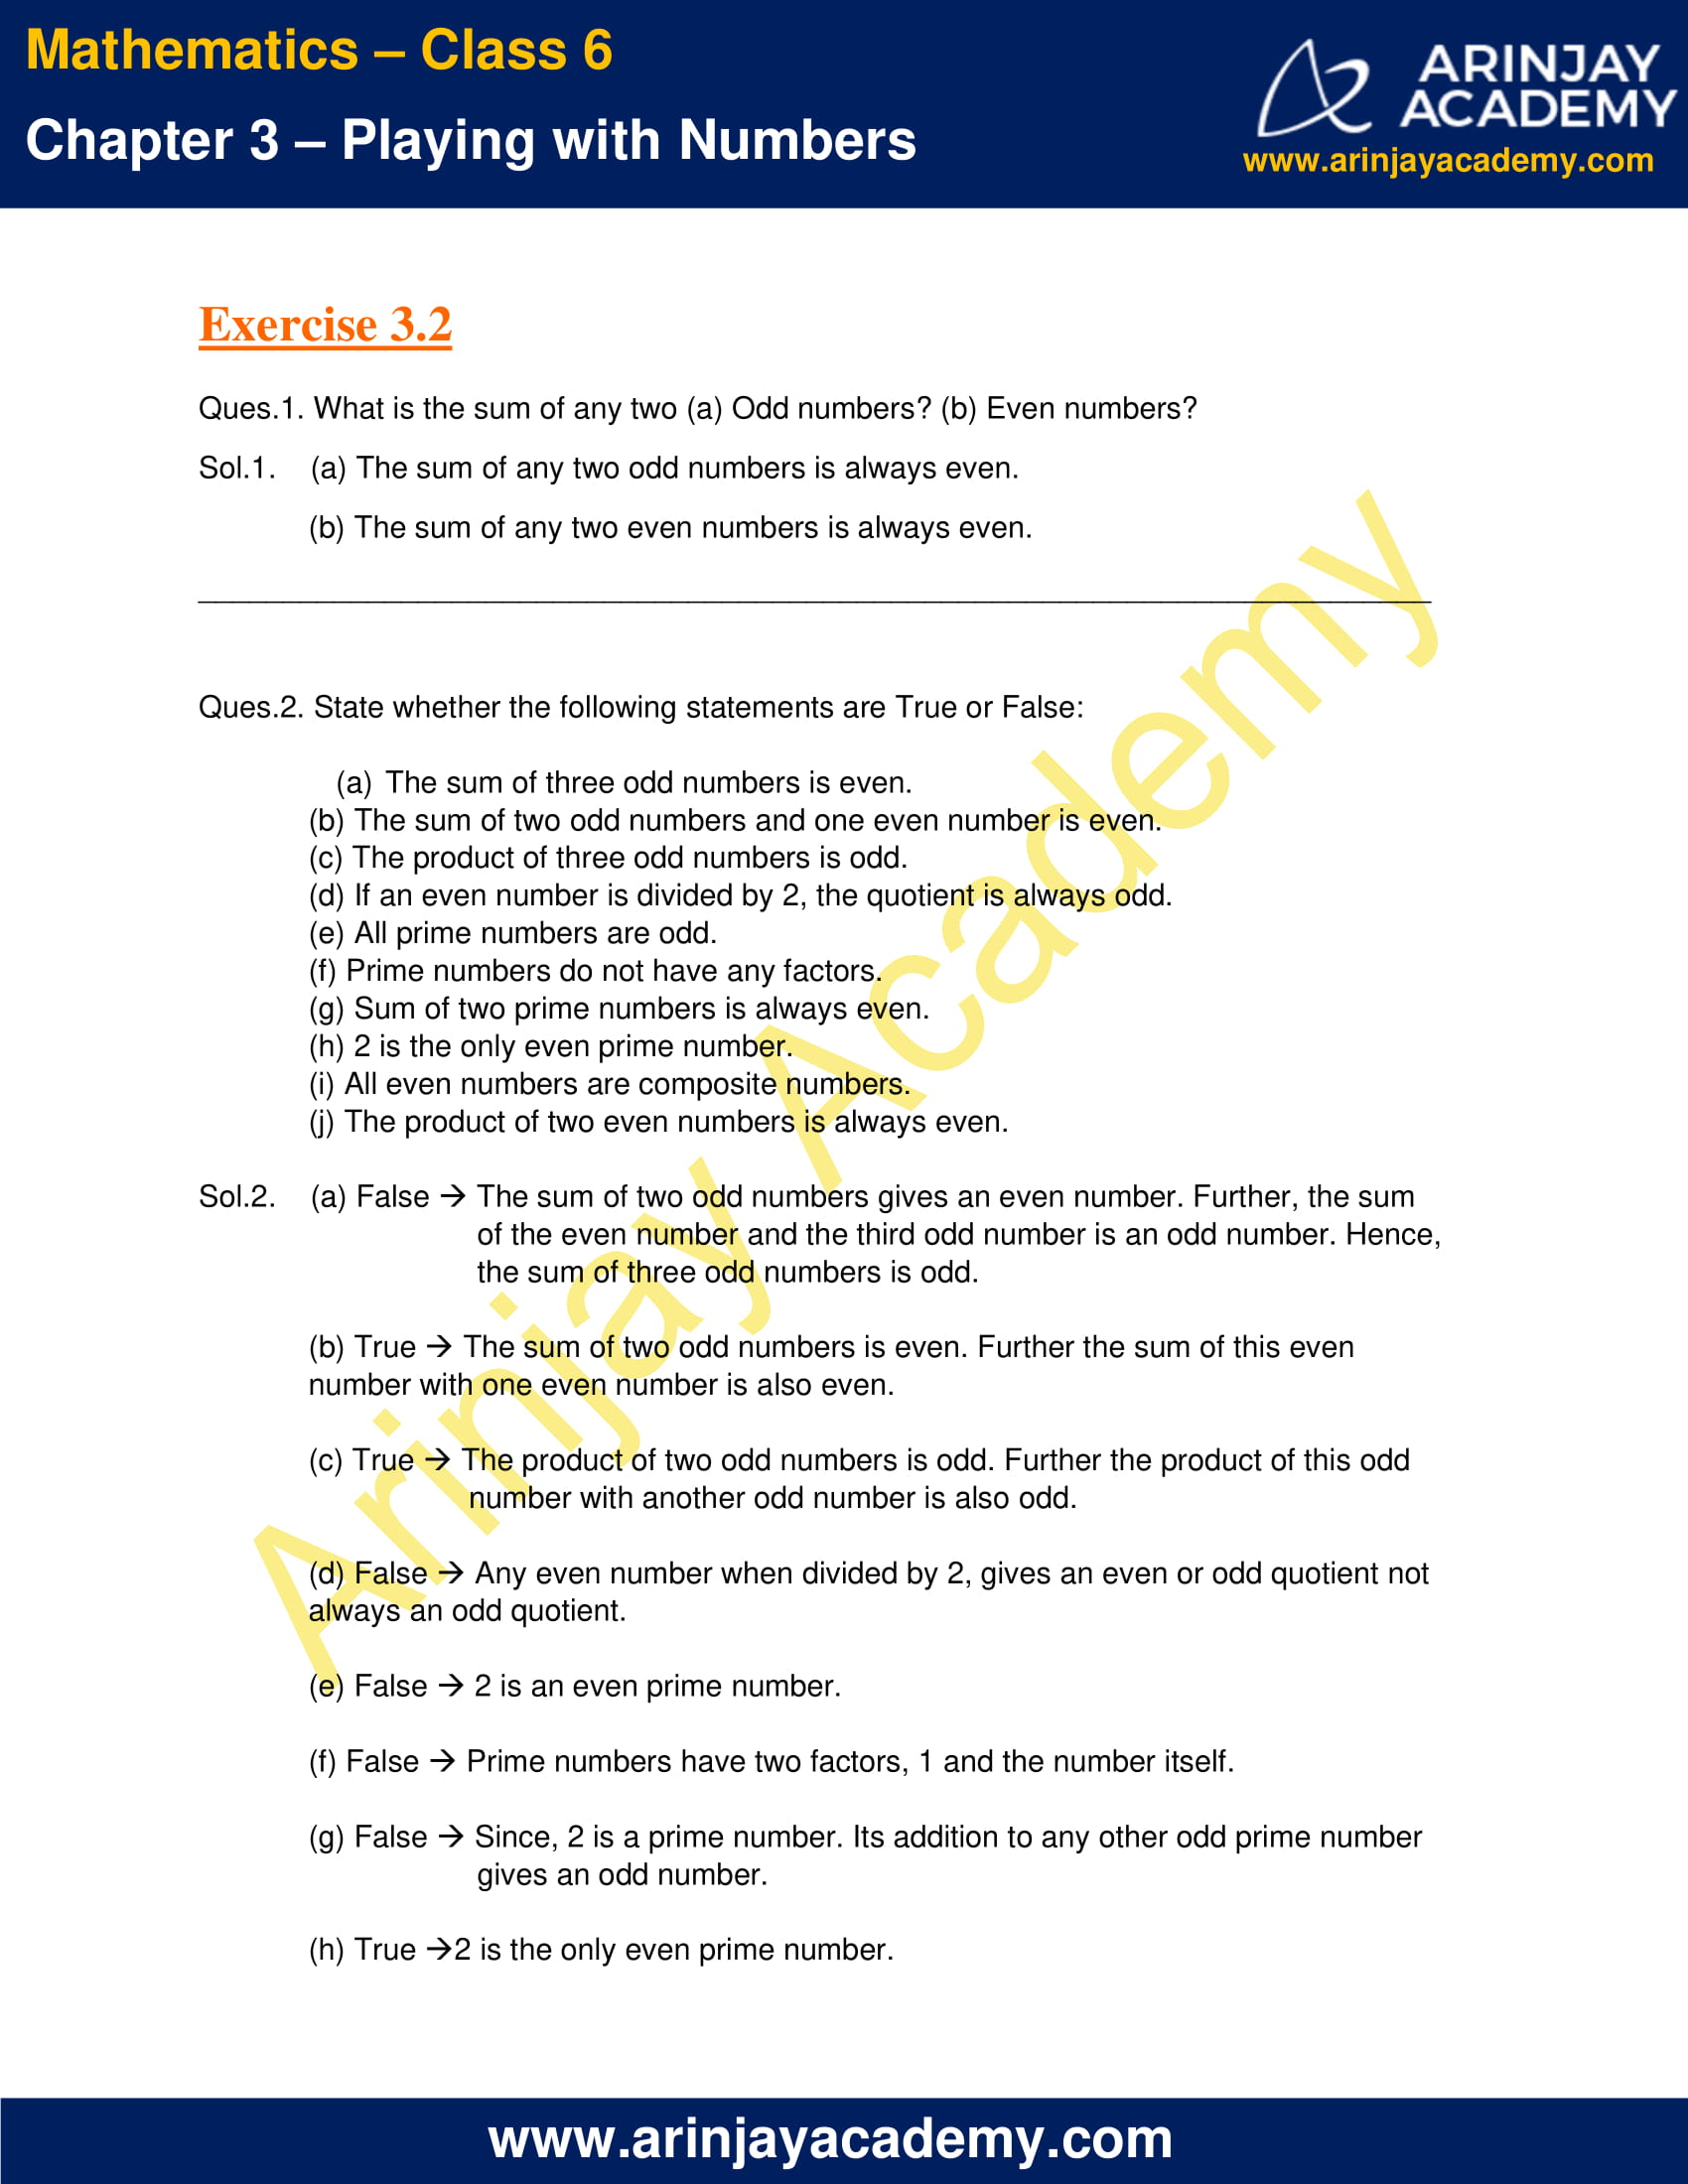 NCERT Solutions for Class 6 Maths Chapter 3 Exercise 3.2 image 1